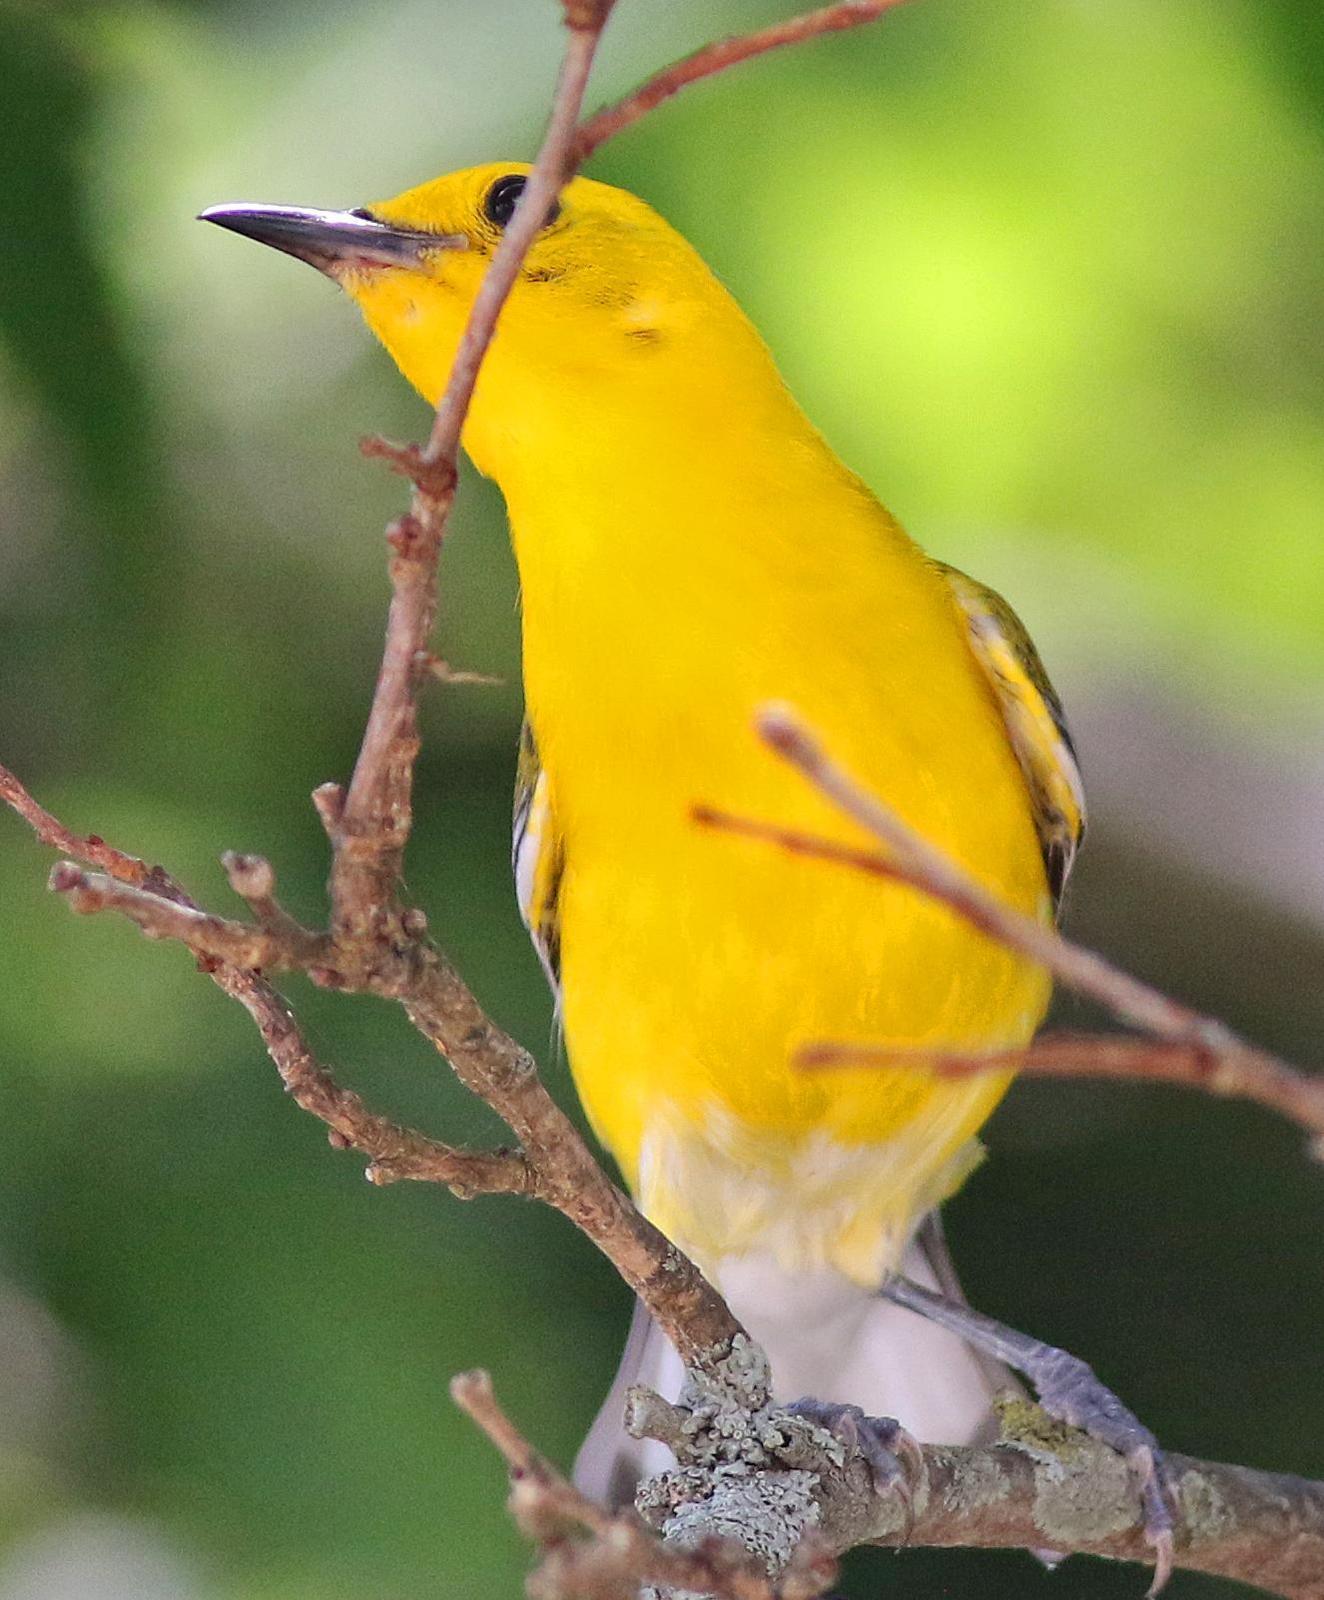 Prothonotary Warbler Photo by Tom Gannon